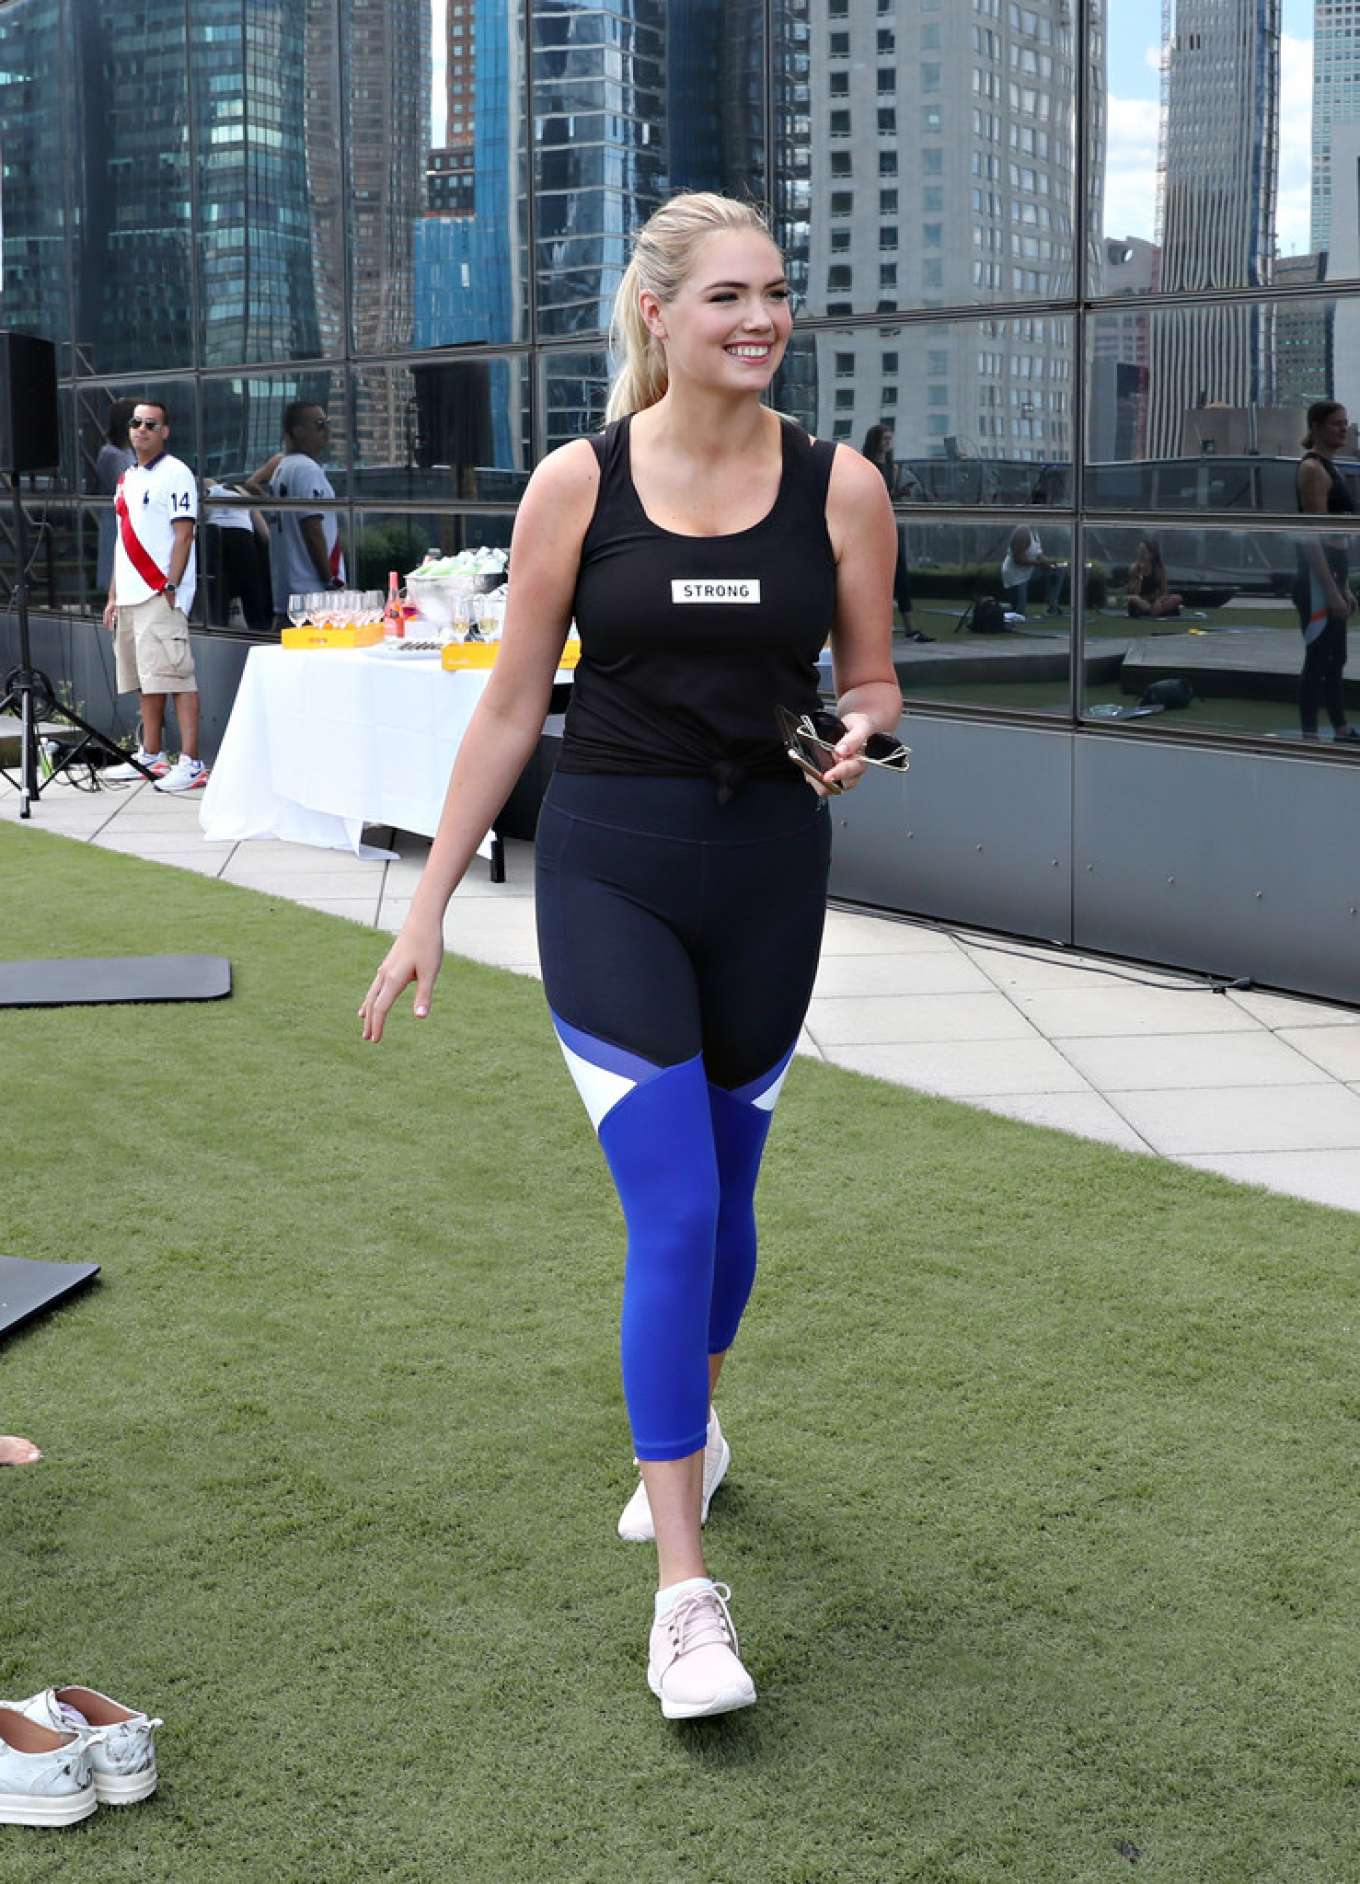 Kate Upton â€“ Pictured at Strong4Me Workout Event in NYC